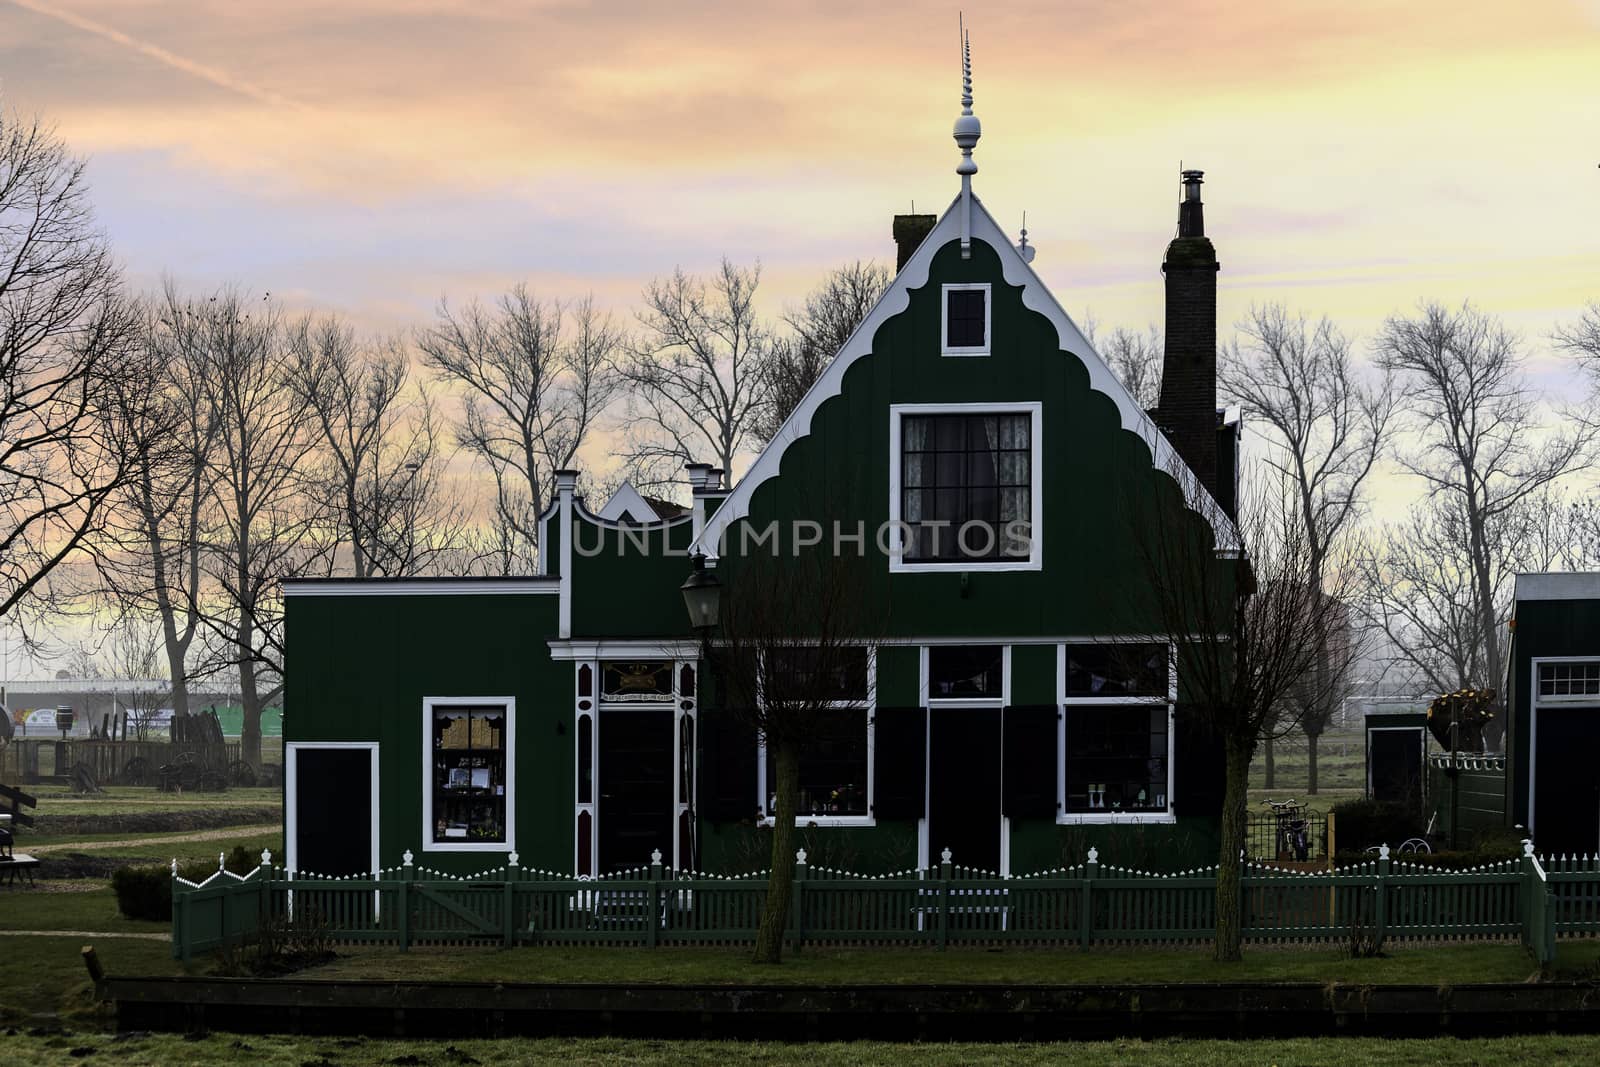 Beaucoutif typical Dutch wooden houses architecture along the calm canal of Zaanse Schans located at the North of Amsterdam, Netherlands by ankorlight